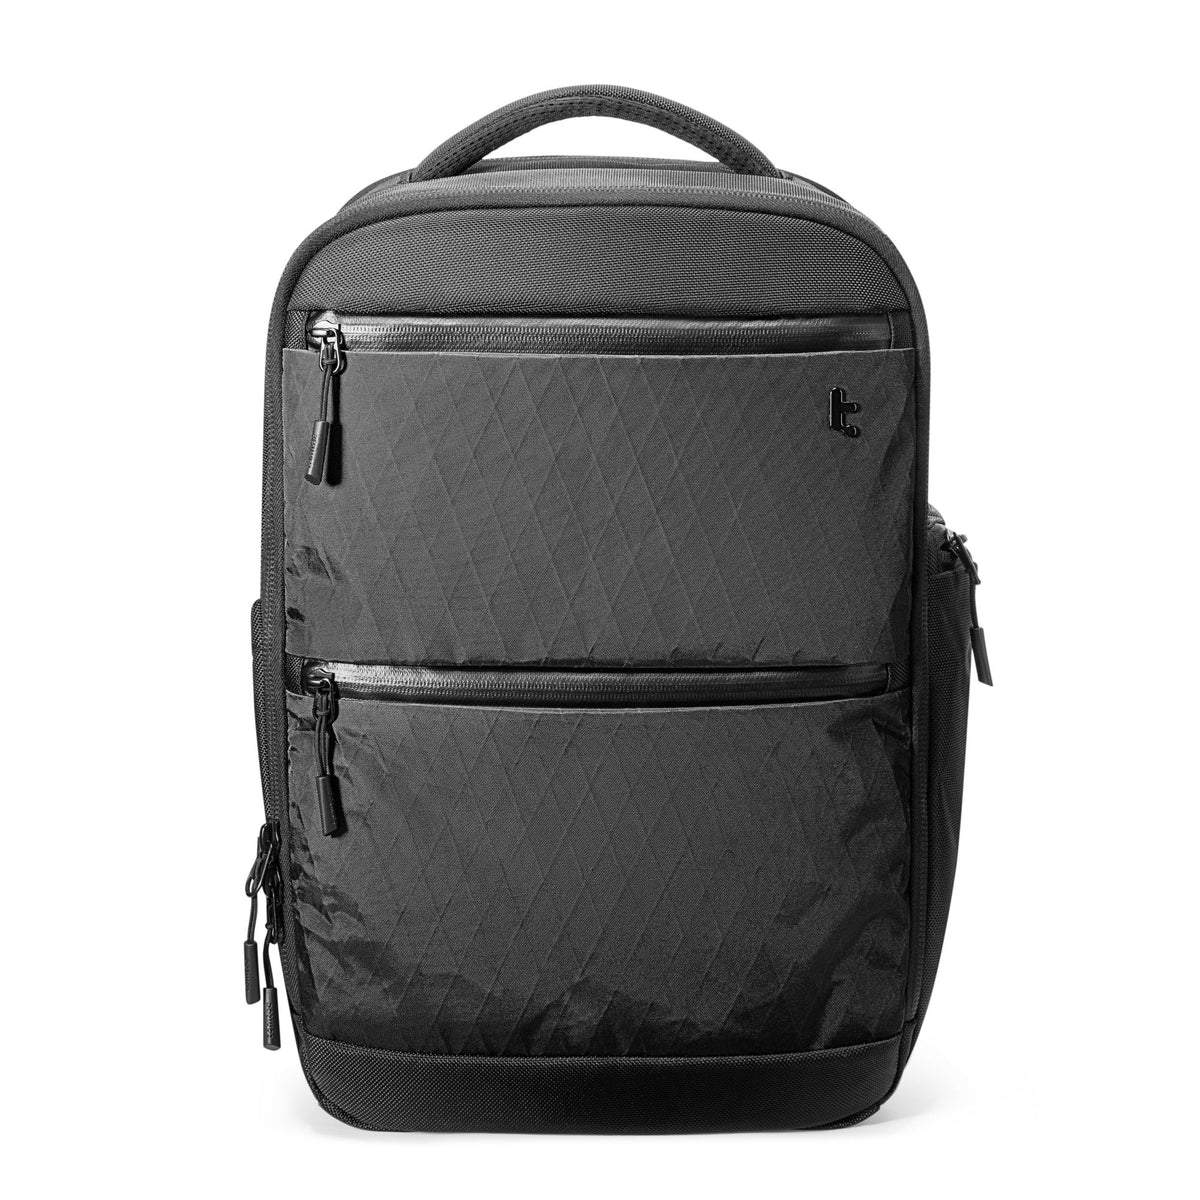 primary_TechPack-T73 X-Pac Laptop Backpack 20L